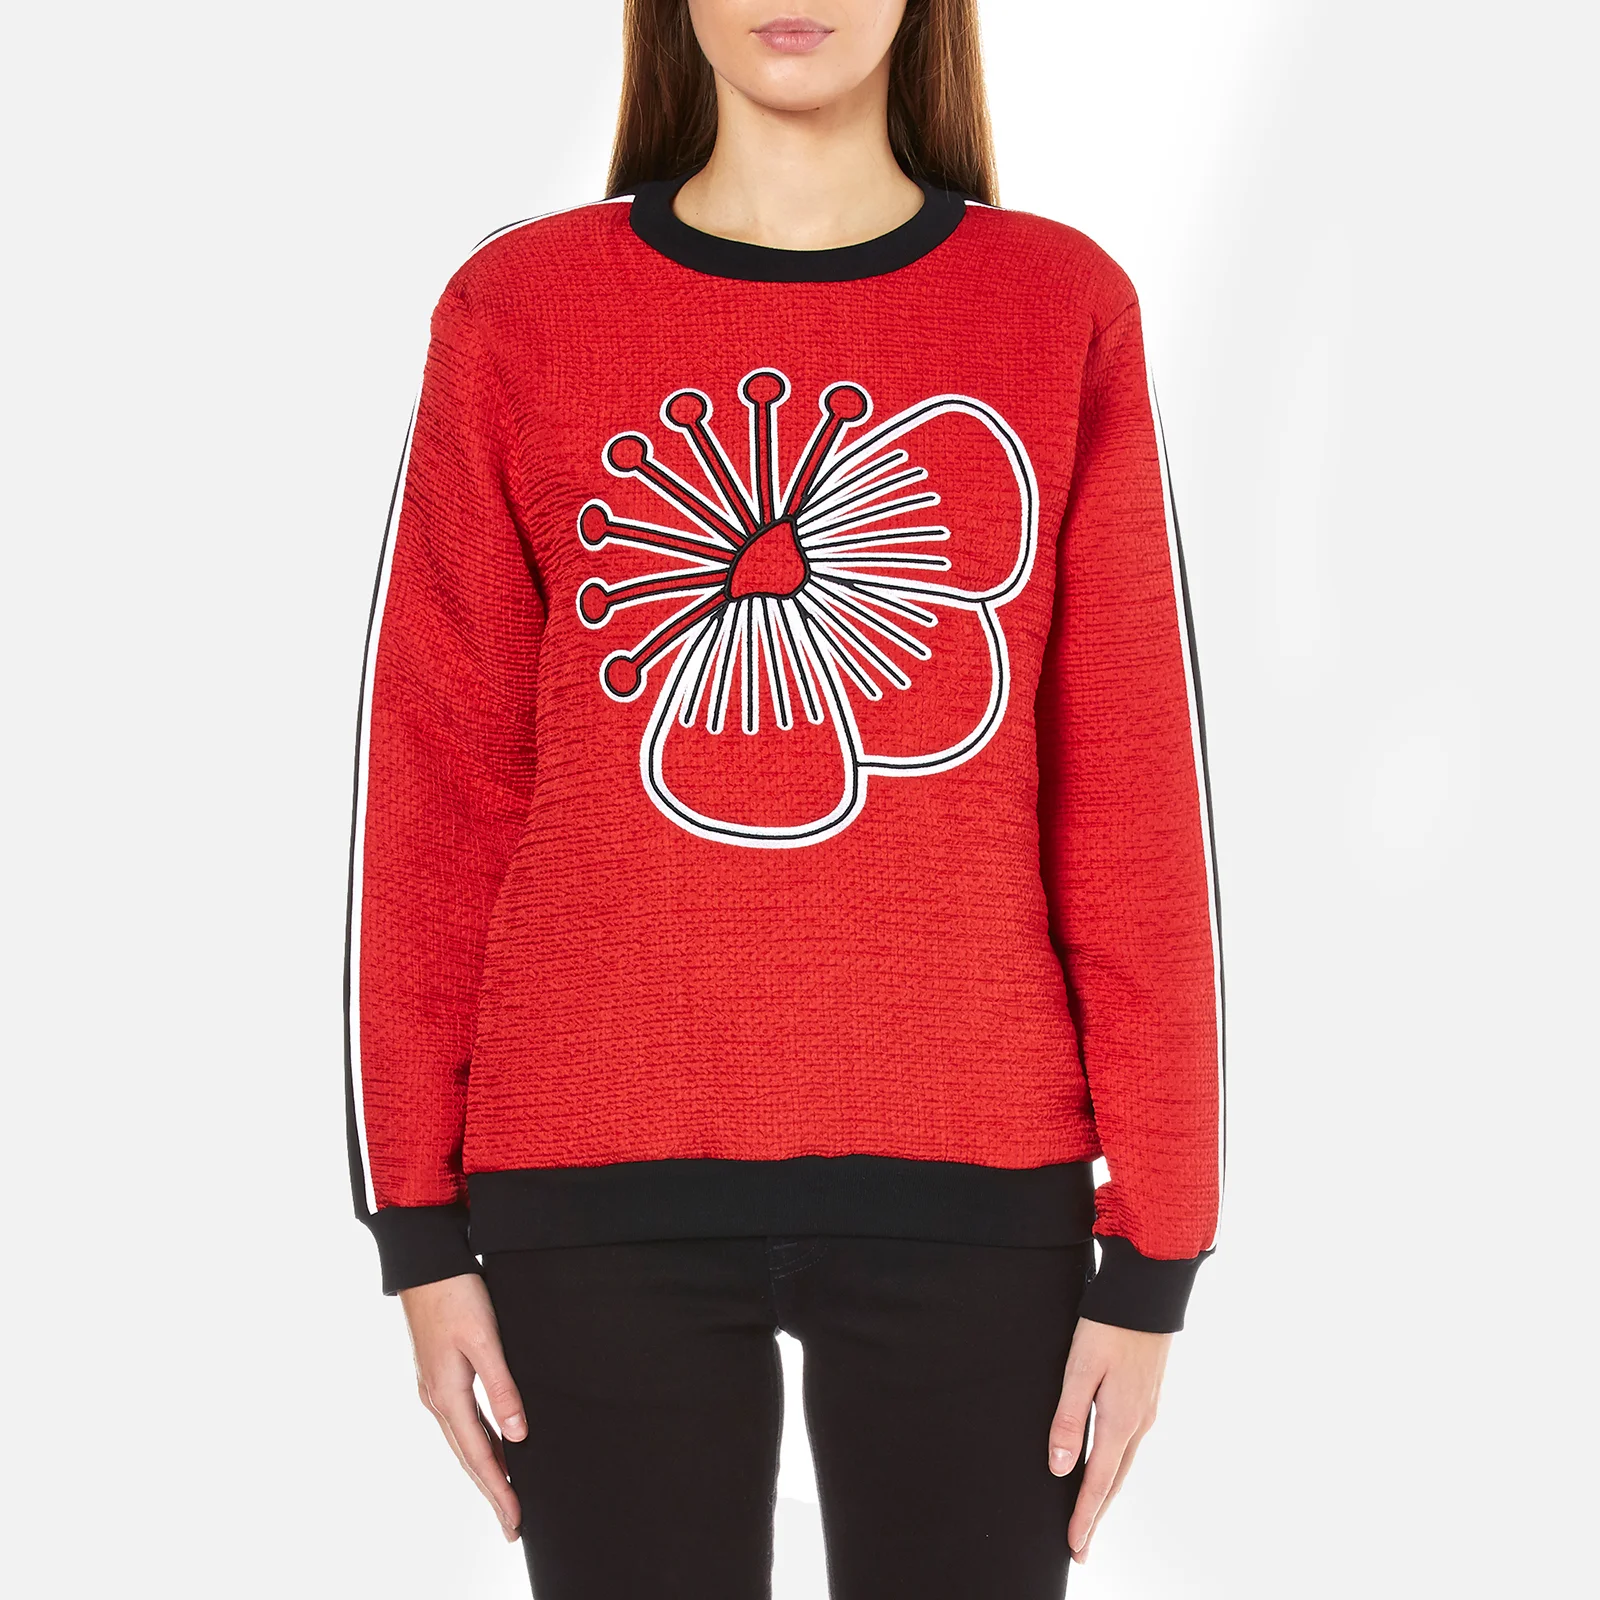 KENZO Women's Quilted Sweatshirt with Athletic Side Stripe and Tenamie Flower - Red Image 1